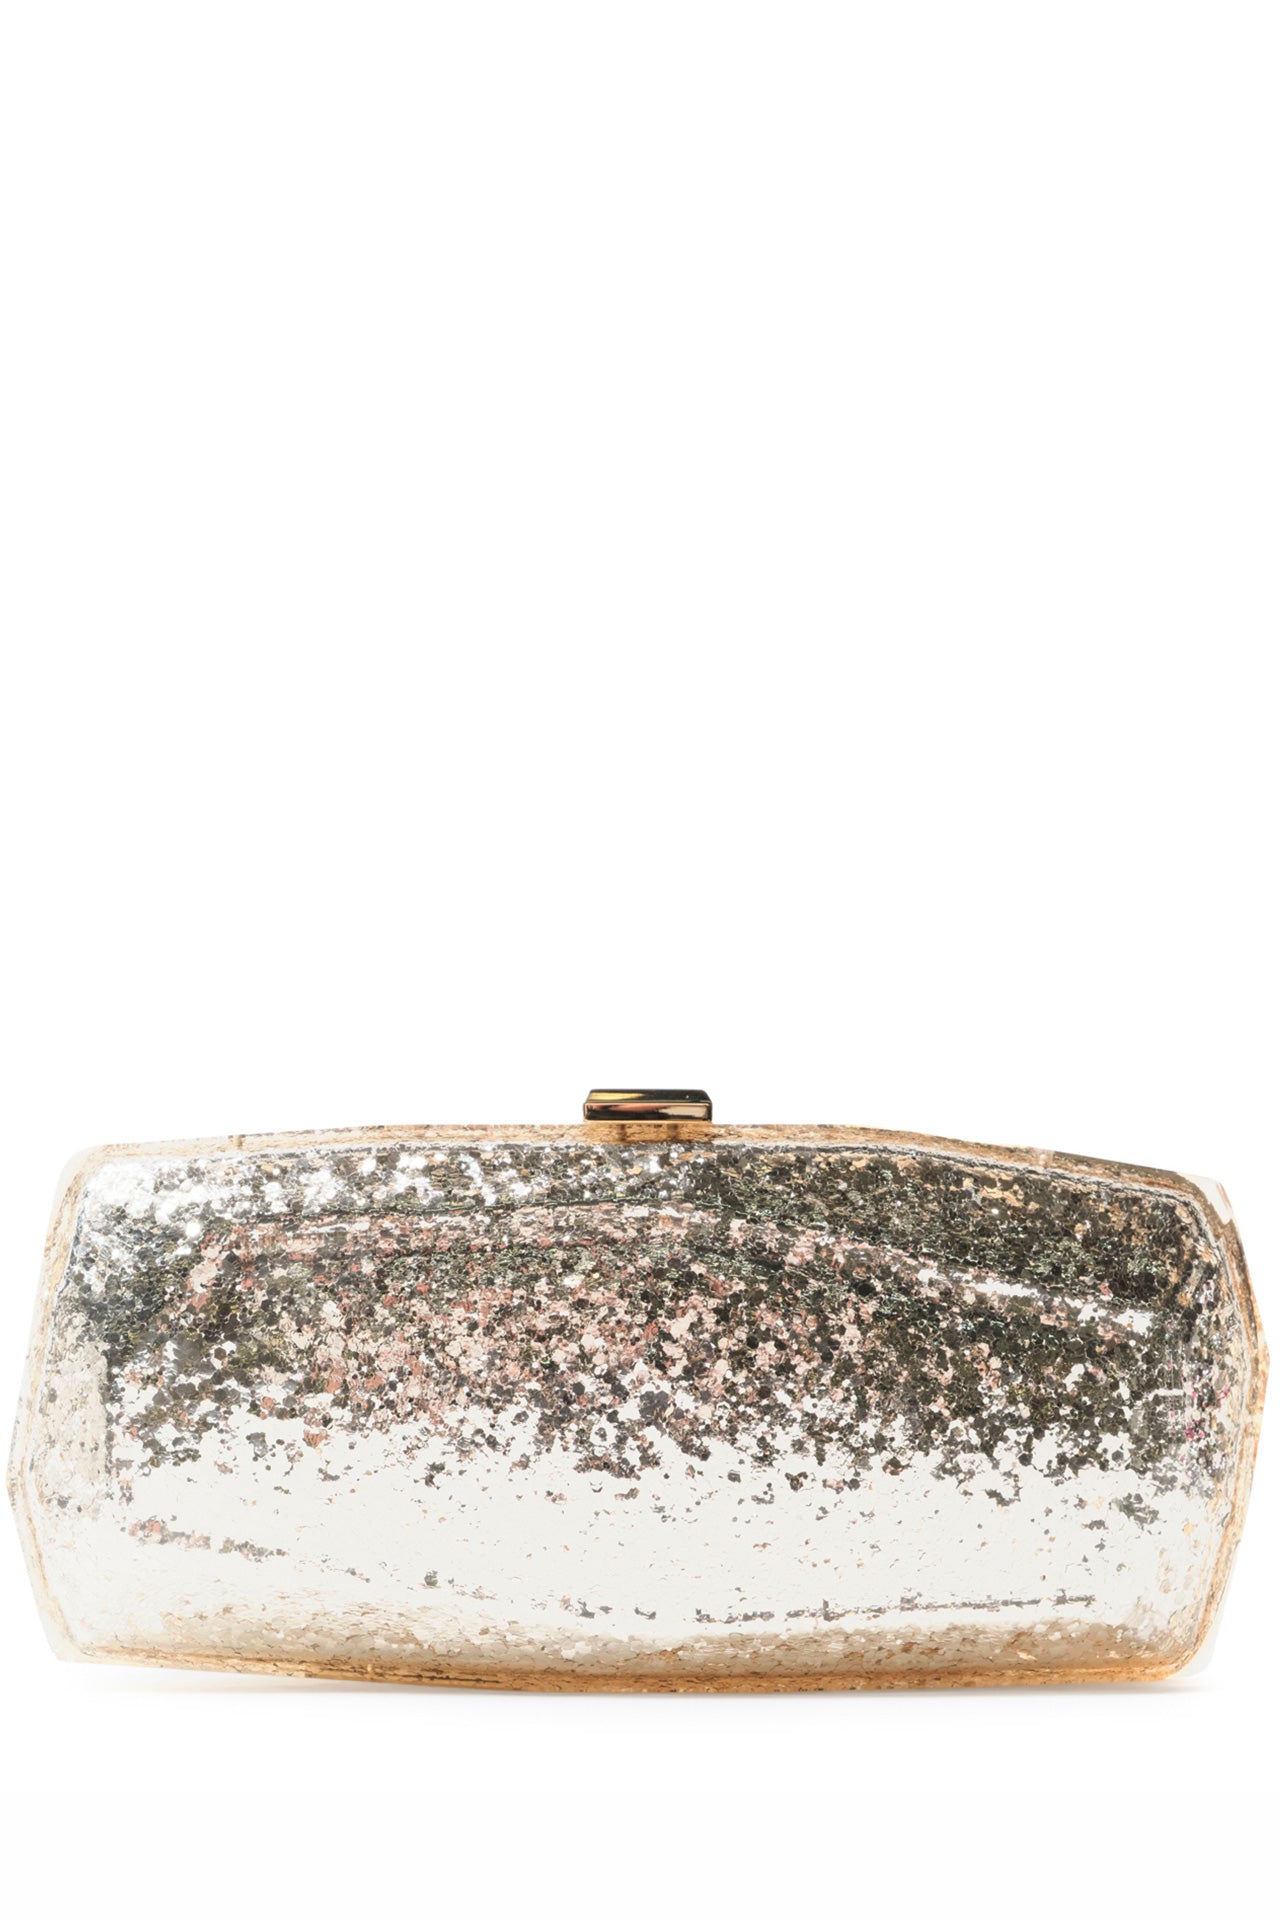 Monique Lhuillier lucite faceted minaudière handbag in Champagne Glitter with detachable chain - front without chain.